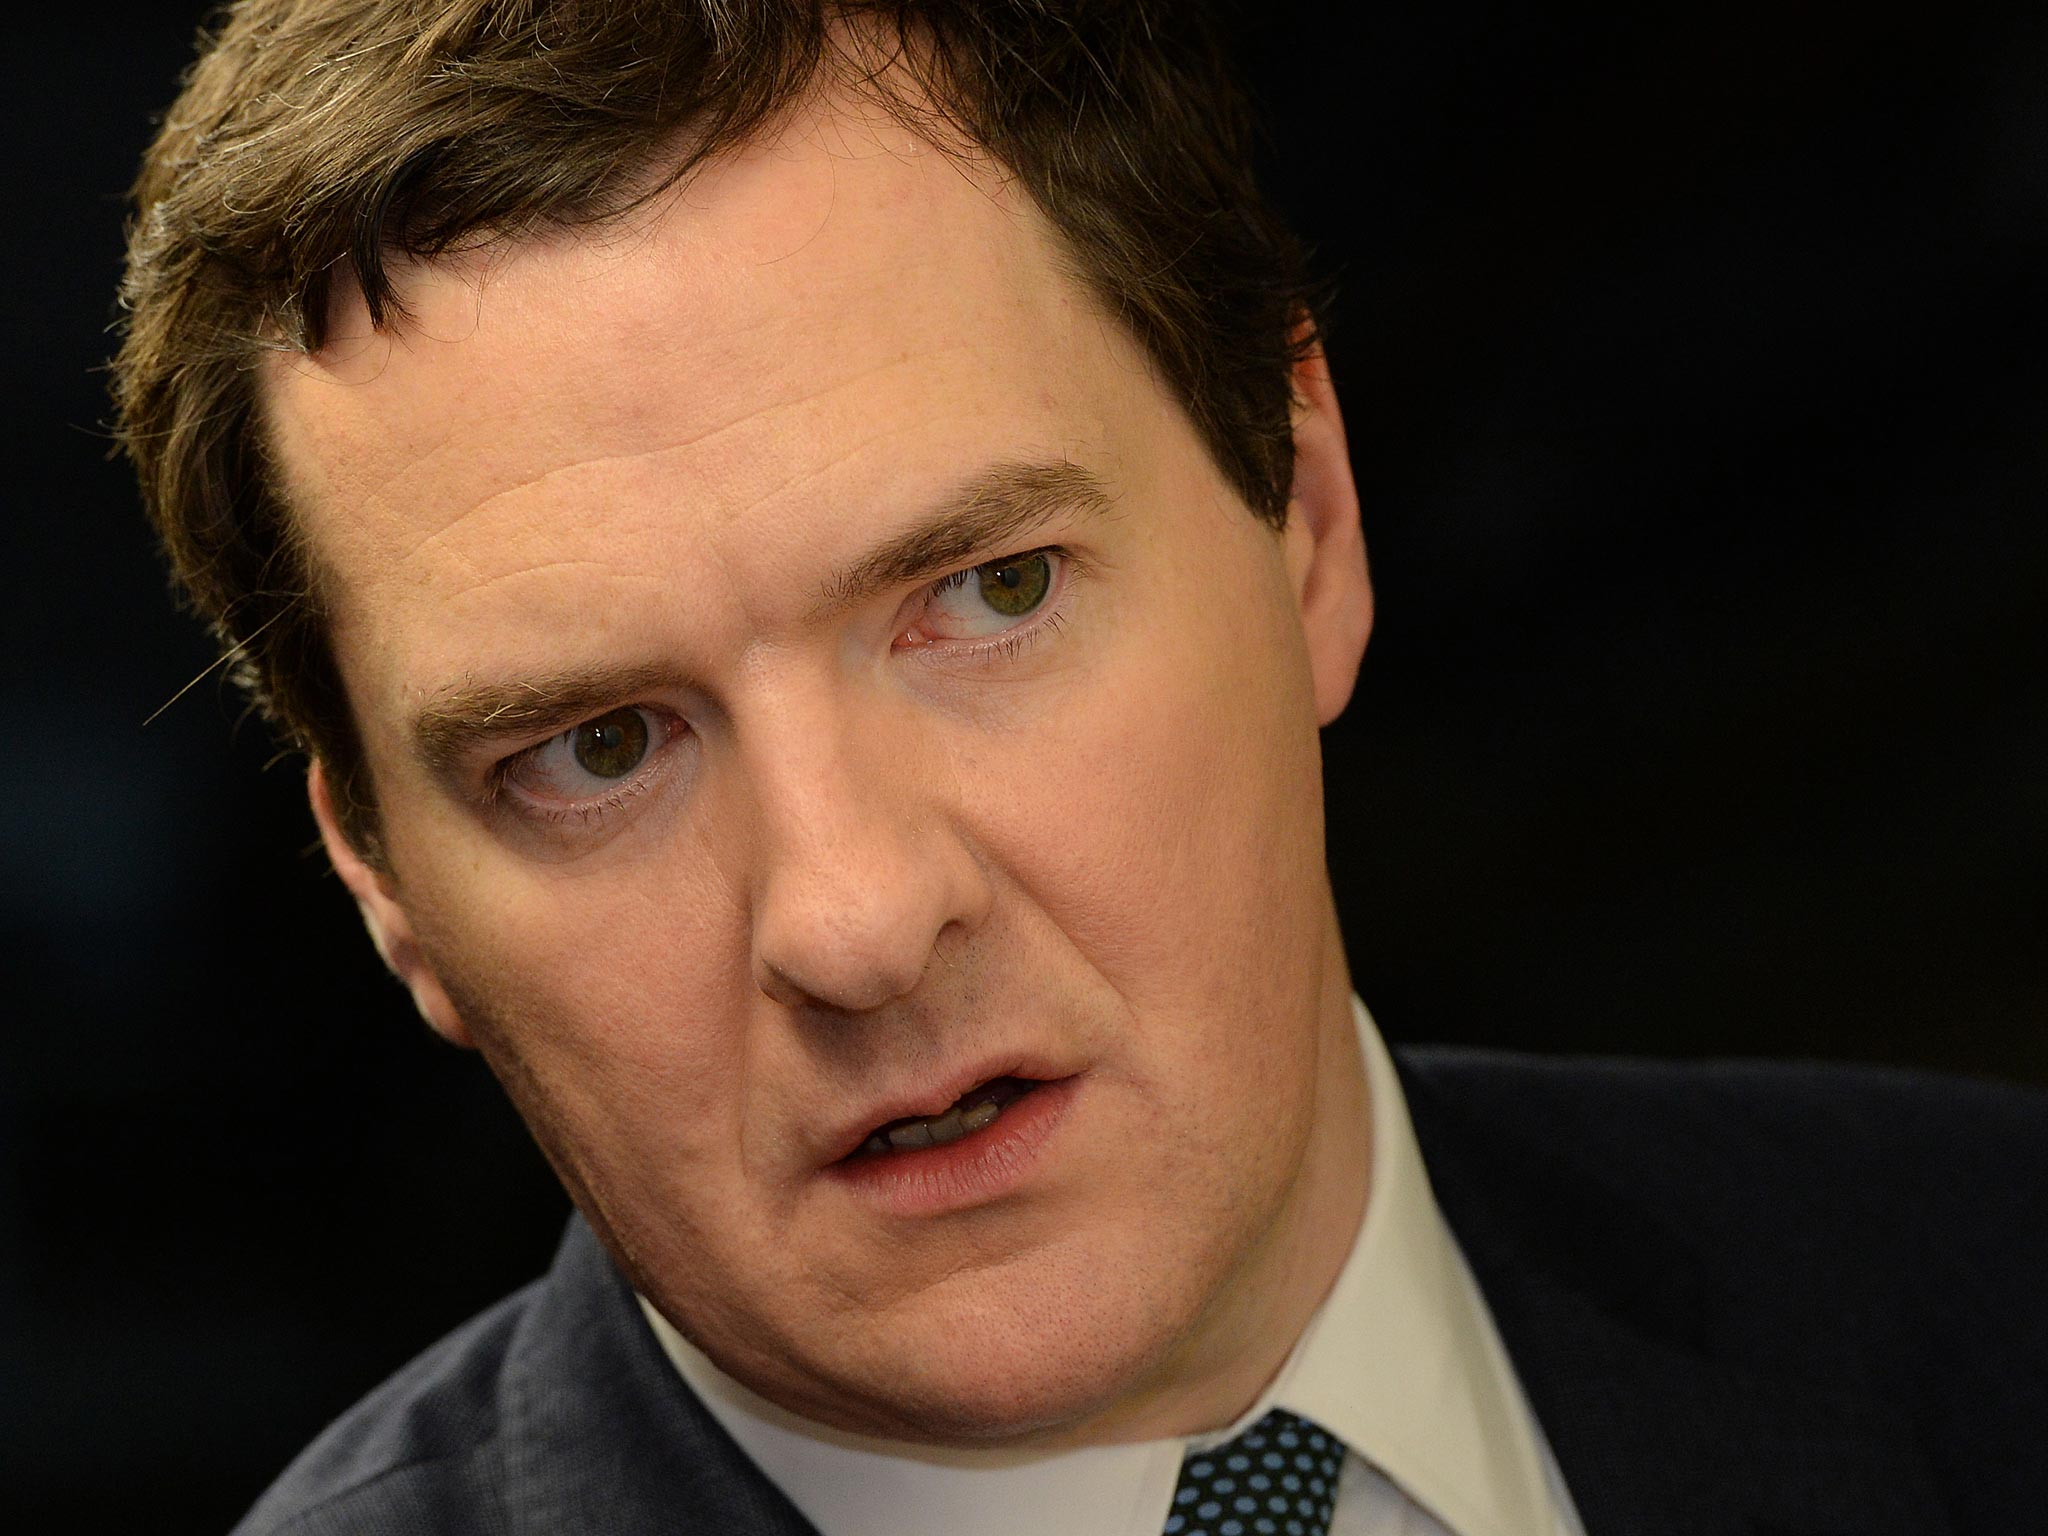 Chancellor George Osborne will reject tax cuts for middle classes in his Budget